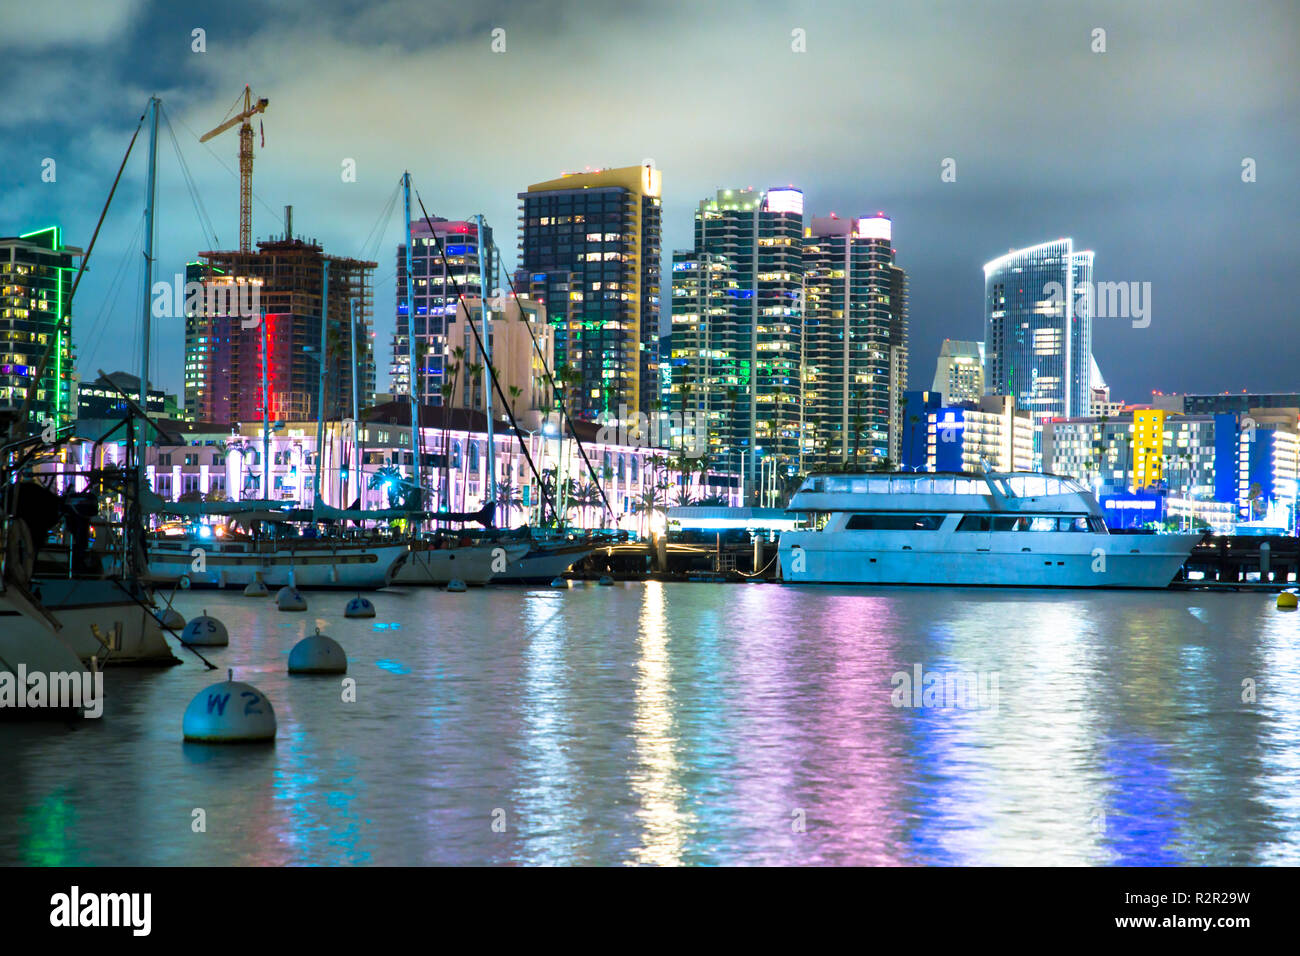 Beautiful San Diego California skyline at harbor seen at night with bay and boats Stock Photo